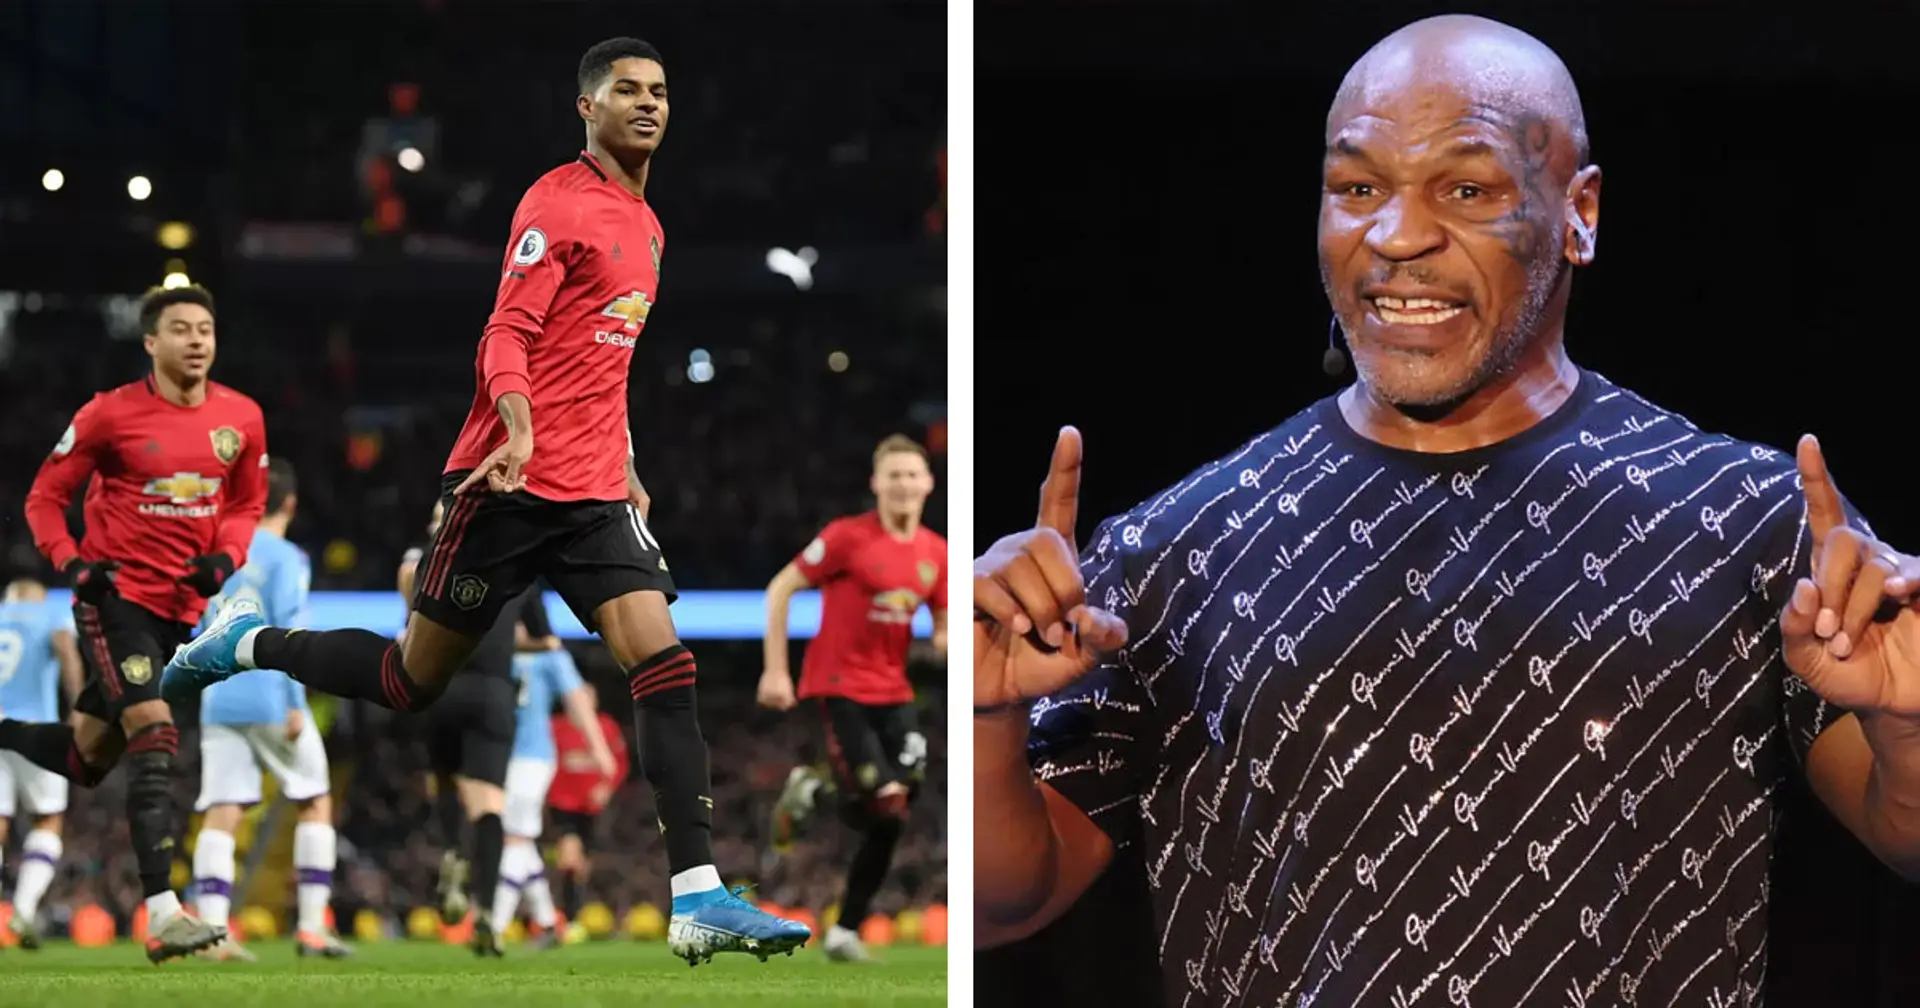 Boxing Legend Mike Tyson: ‘The first time I heard about Man City was because of Man United’